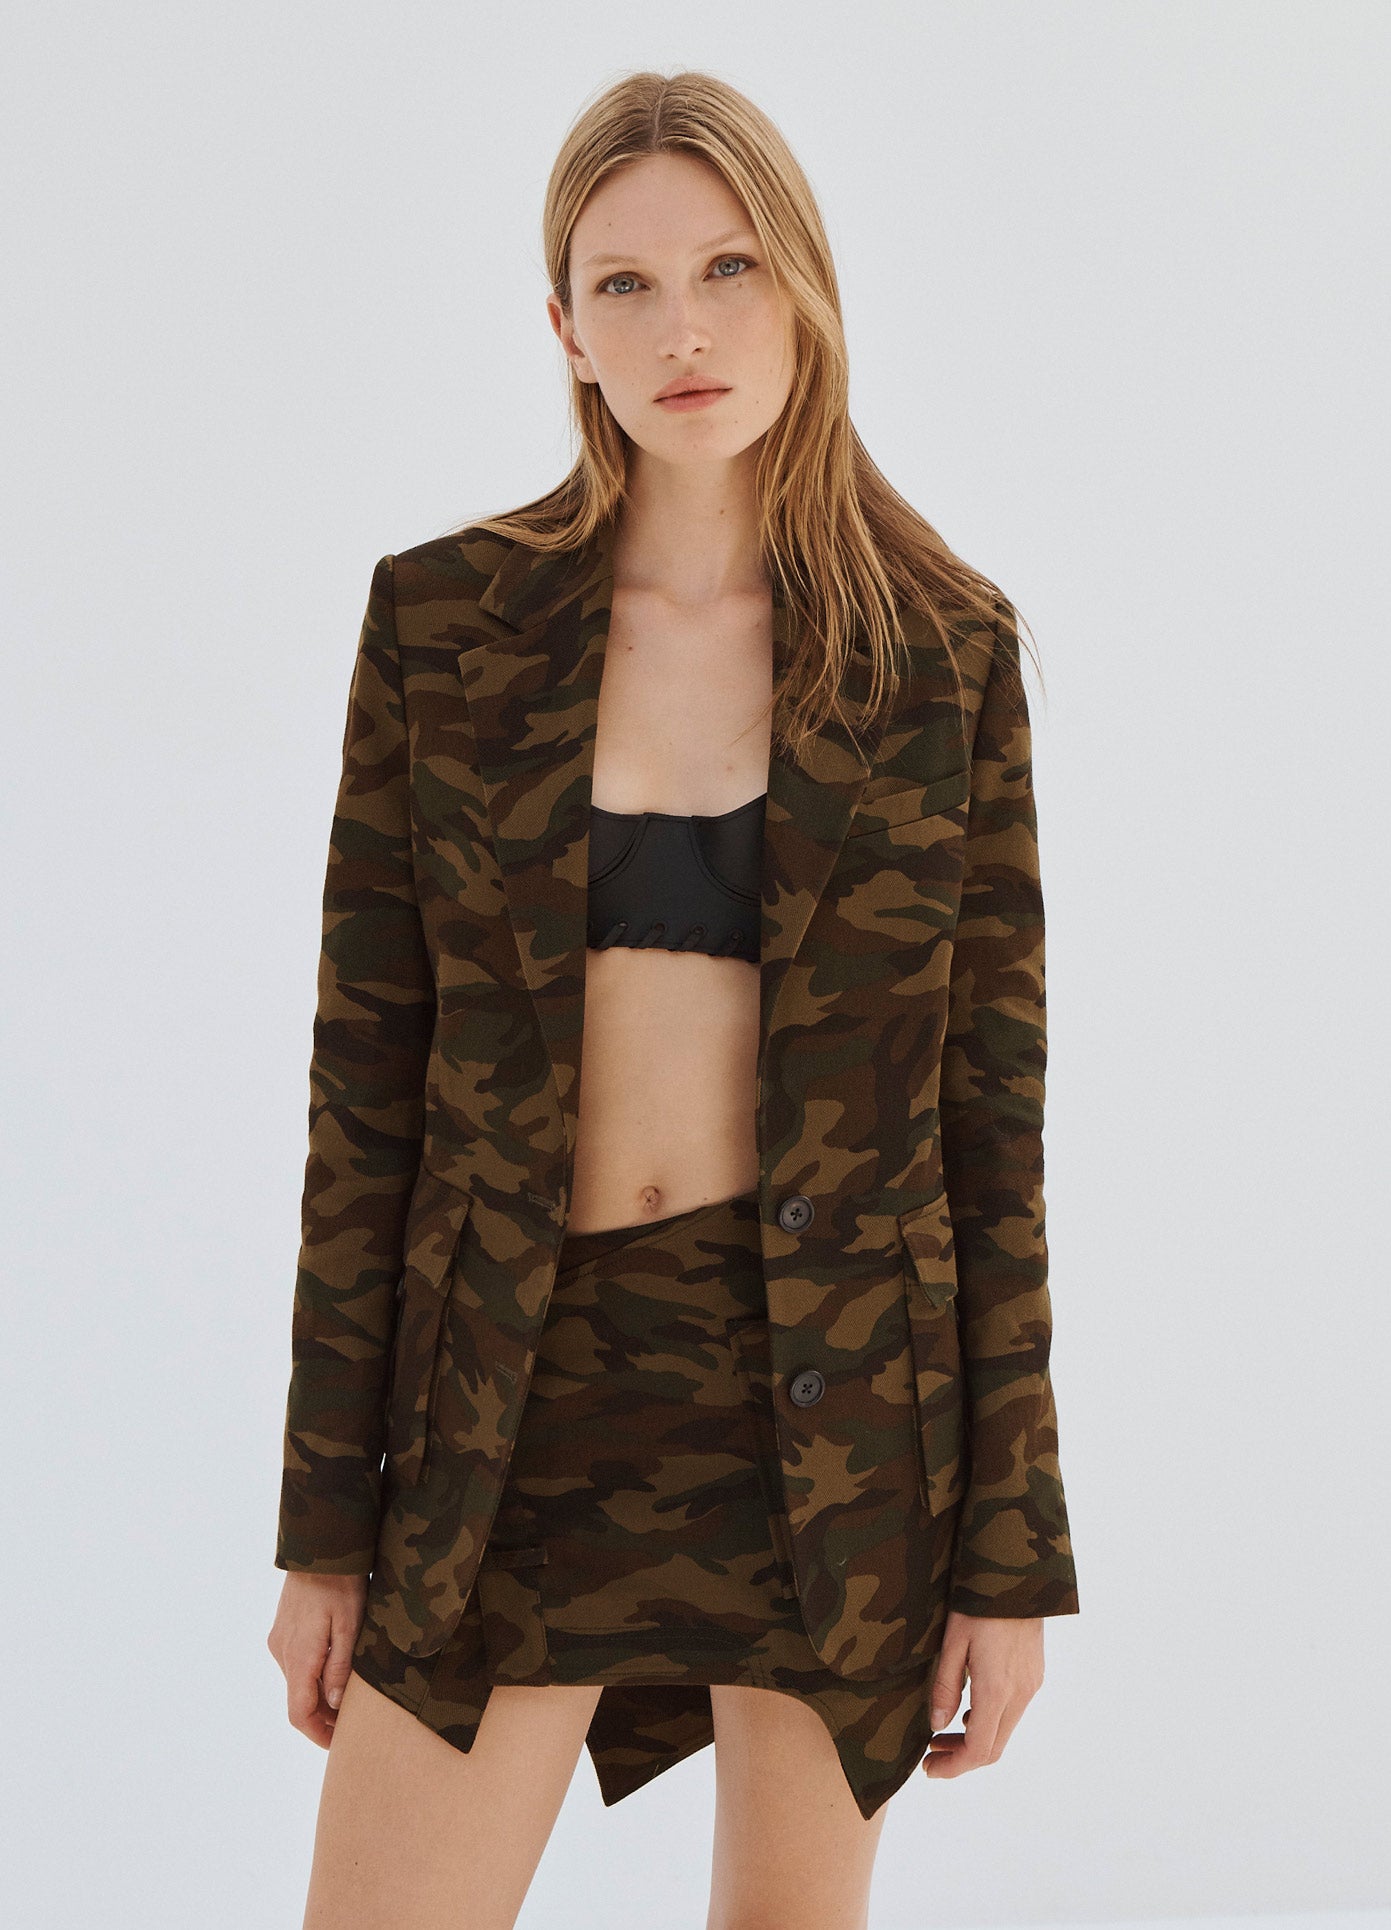 MONSE Camo Back Cut Out Jacket on Model Unbuttoned Front View